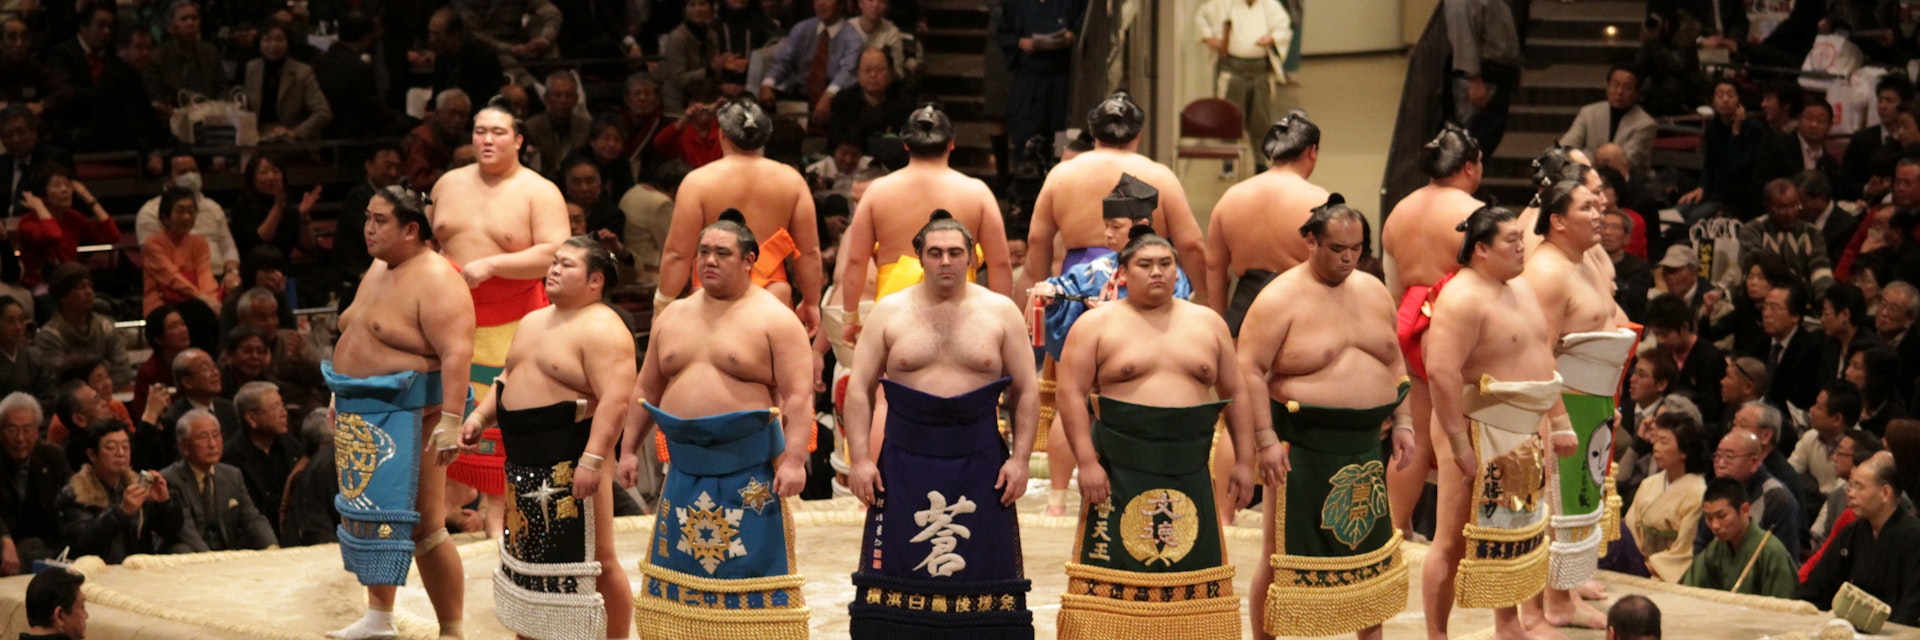 TOKYO - JANUARY 20: High rank sumo wrestlers line up with crowd in the Tokyo Grand Sumo Tournament January 20, 2009 in Tokyo, Japan.; Shutterstock ID 36619300; Your name (First / Last): Laura Crawford; GL account no.: 65050; Netsuite department name: Online Editorial; Full Product or Project name including edition: Japan page Top Experiences images